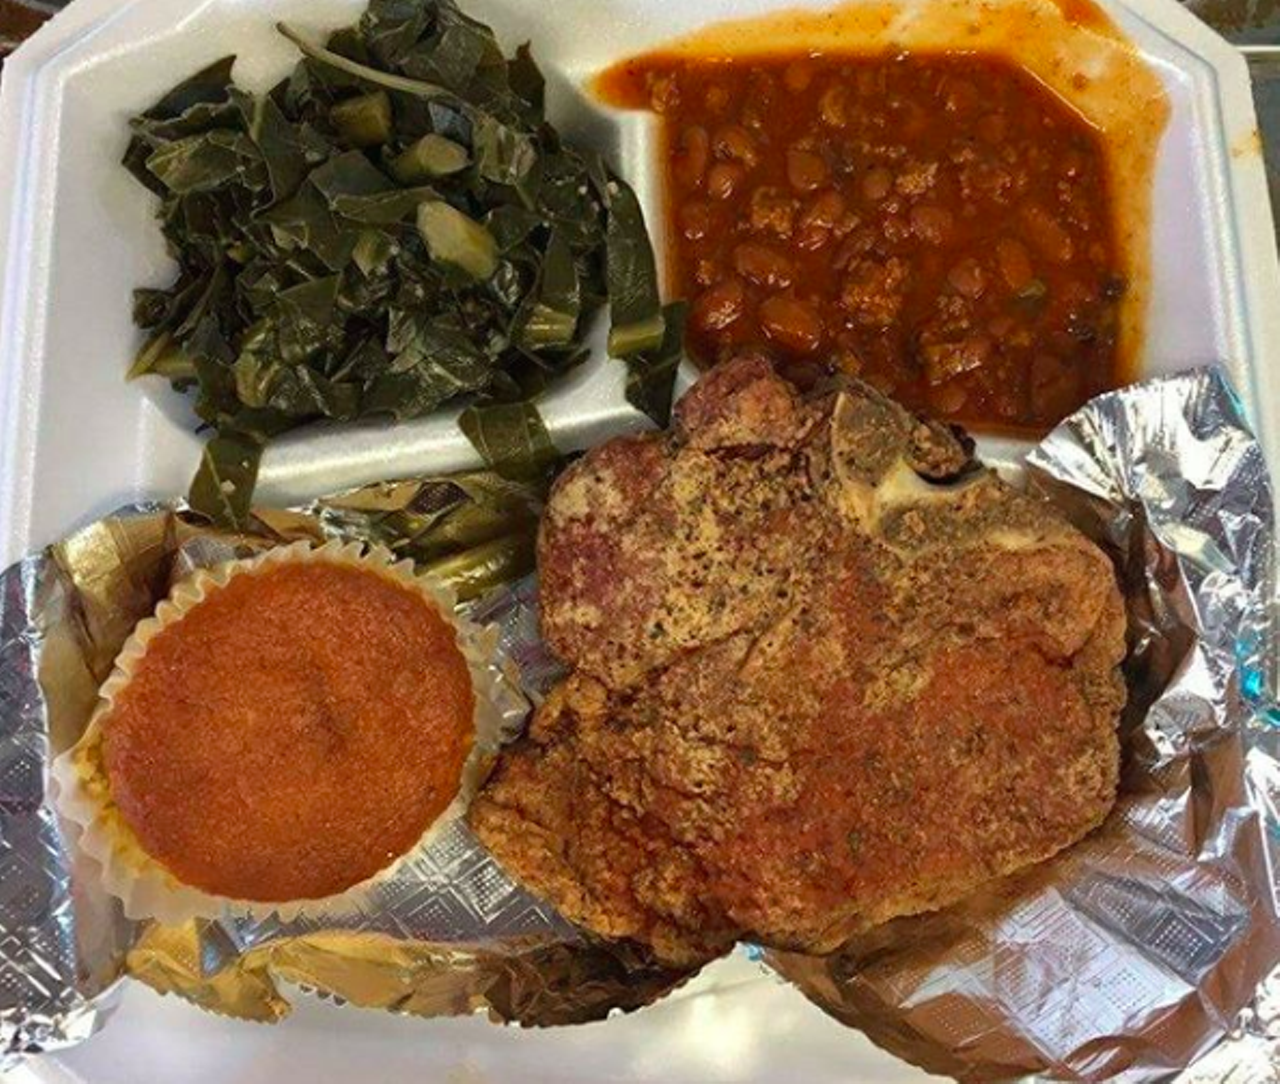 Gas up the car and head on out to Willie Mae’s. Though you’ll have to track it down, this food truck is worth finding for treats like fried gizzards and cornbread dressing.
Photo via Instagram / williemaessoulfoodandmore